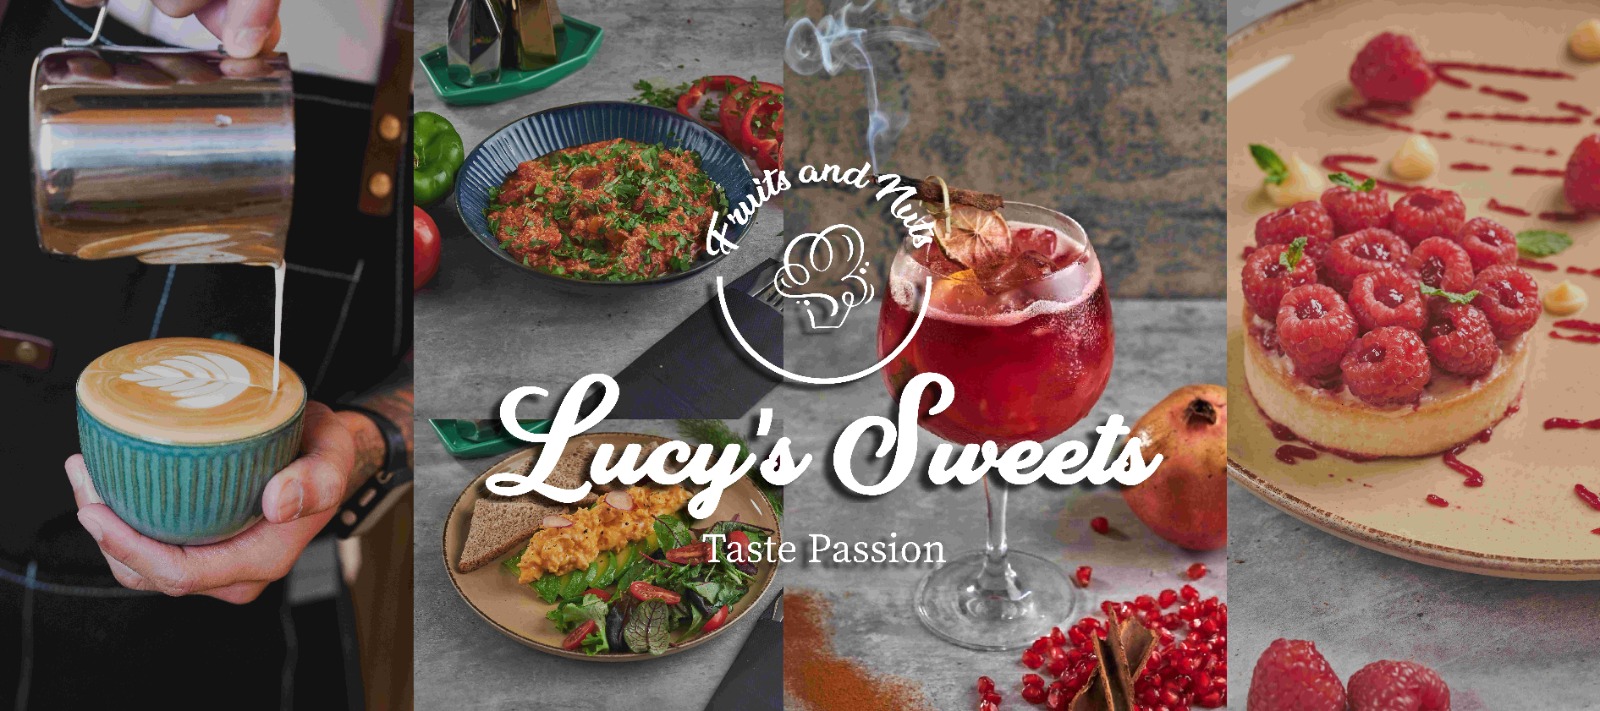 Lucy's Sweets